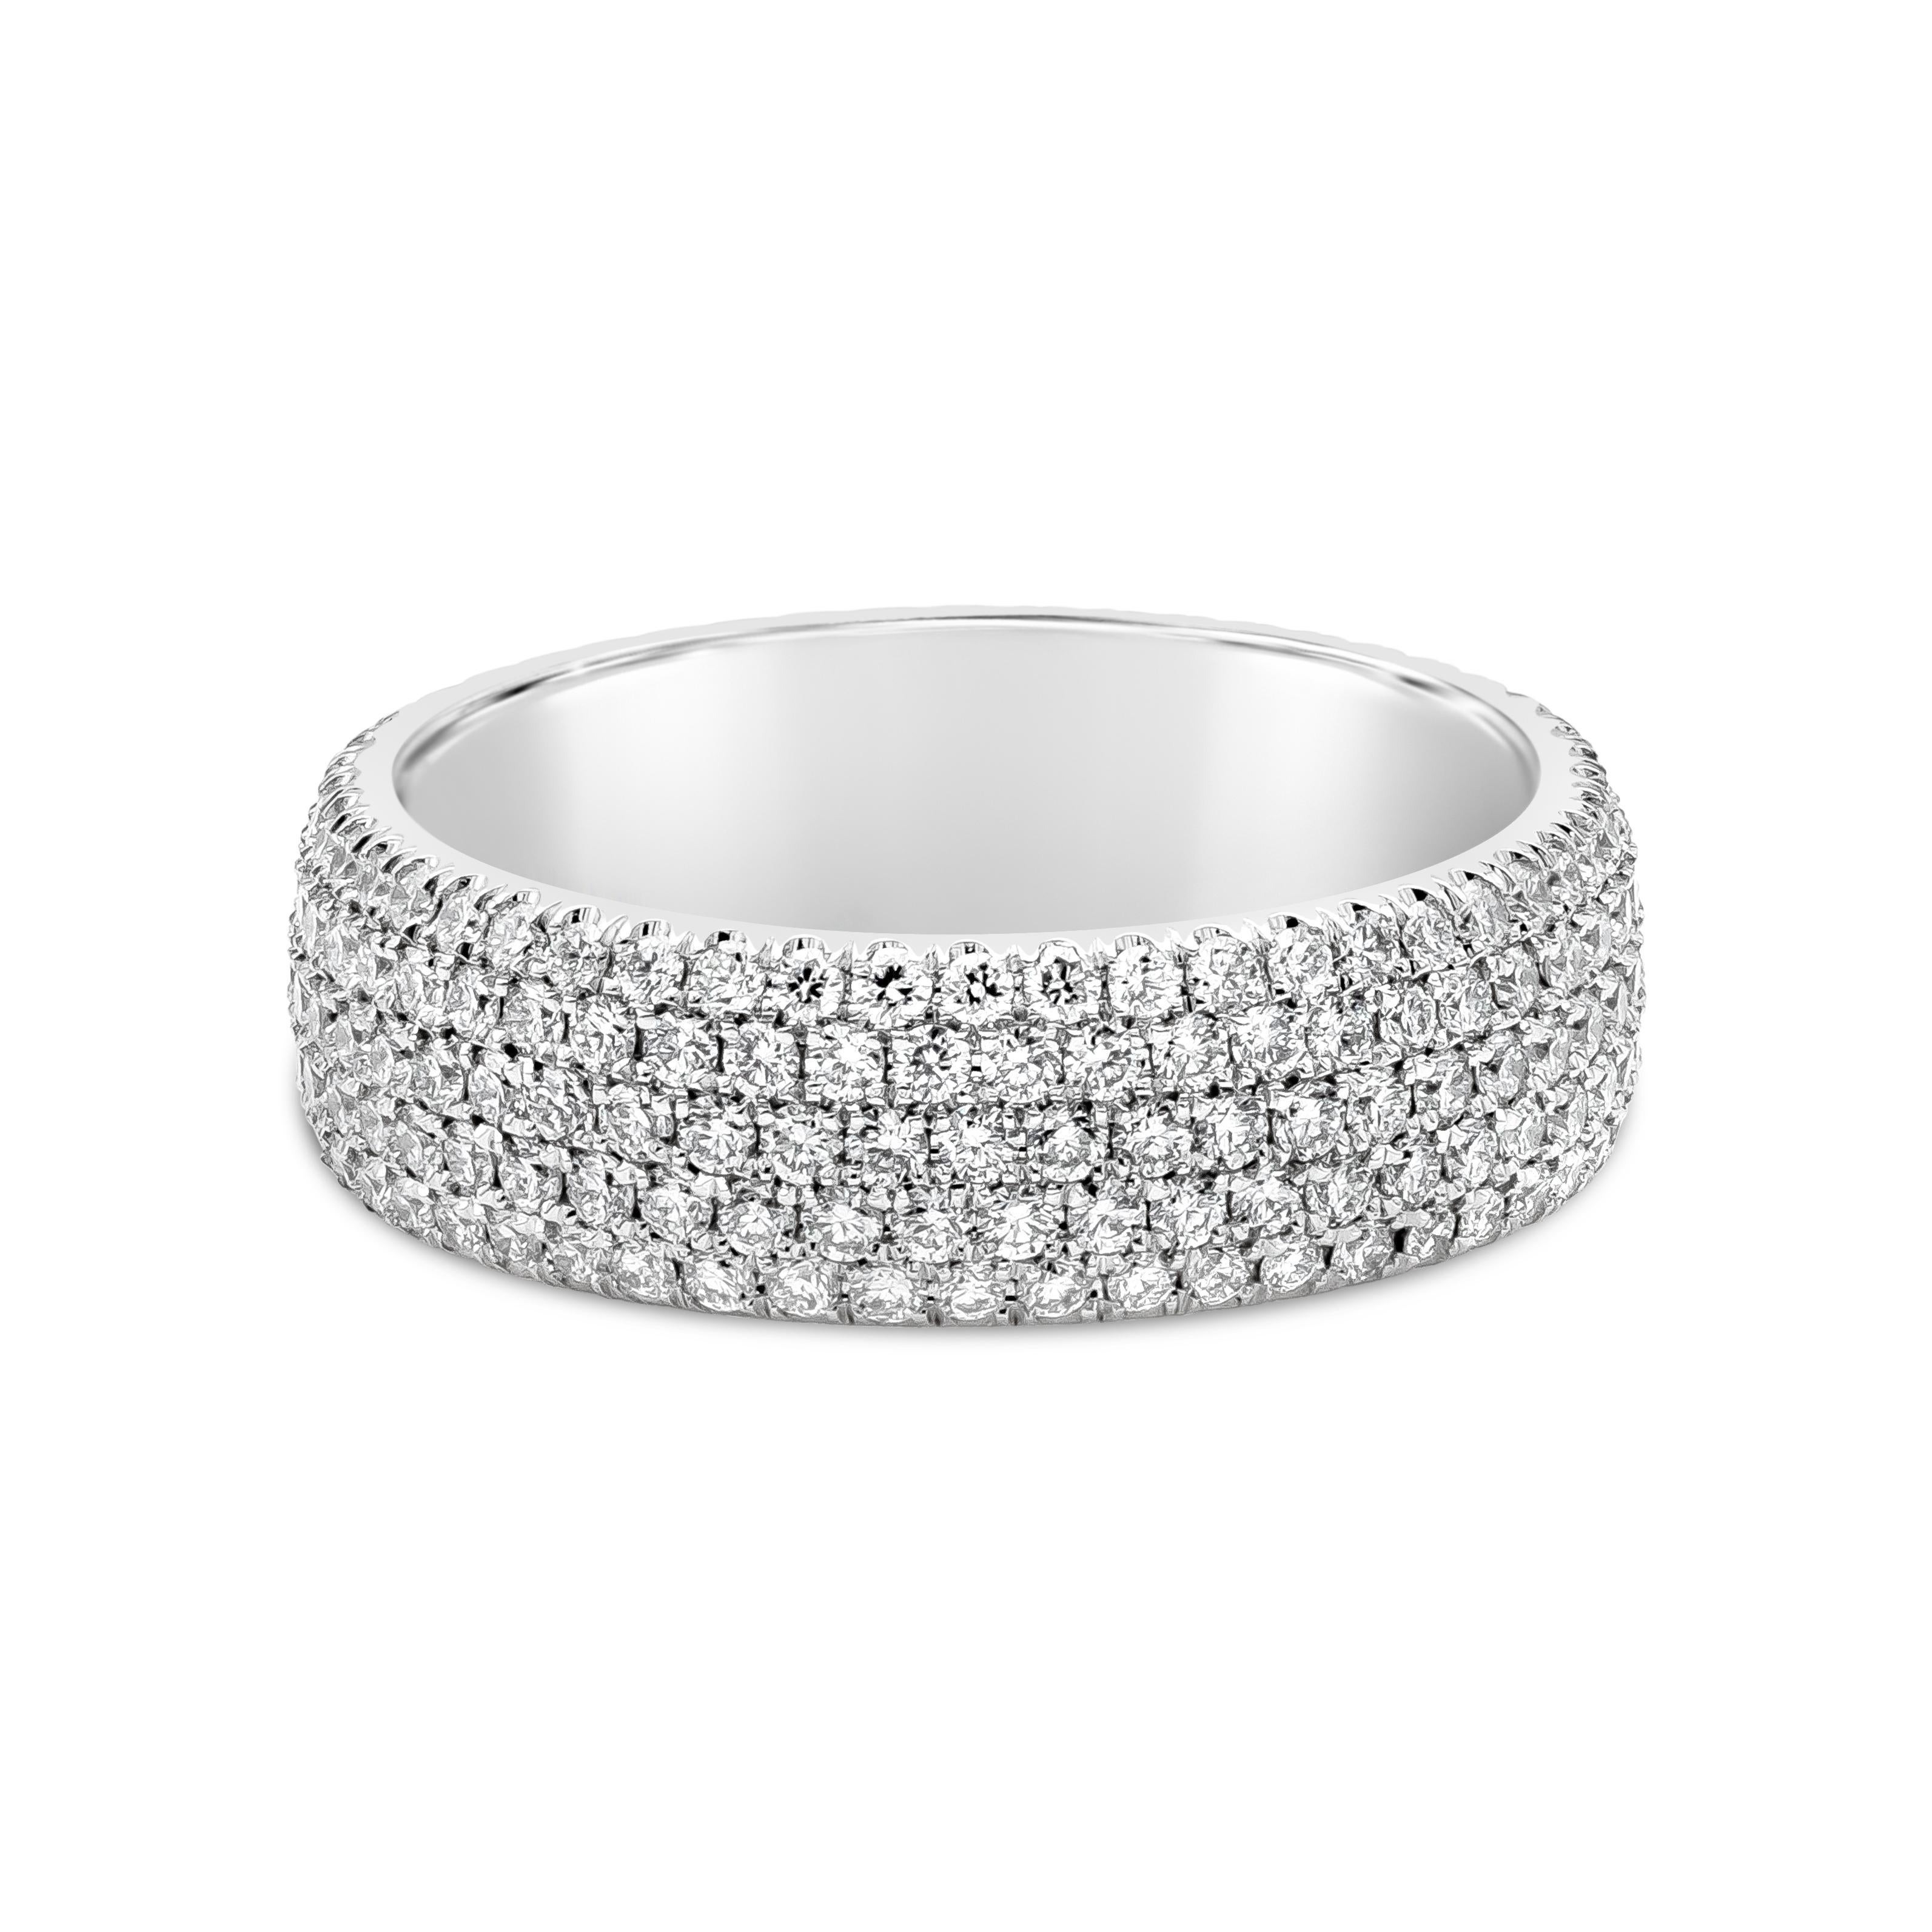 A sleek and elegant wedding band style showcasing five rows of round brilliant pave set diamonds weighing 1.60 carats total. F color and VS in Clarity. Made in Platinum, Size 6 US

Roman Malakov is a custom house, specializing in creating anything